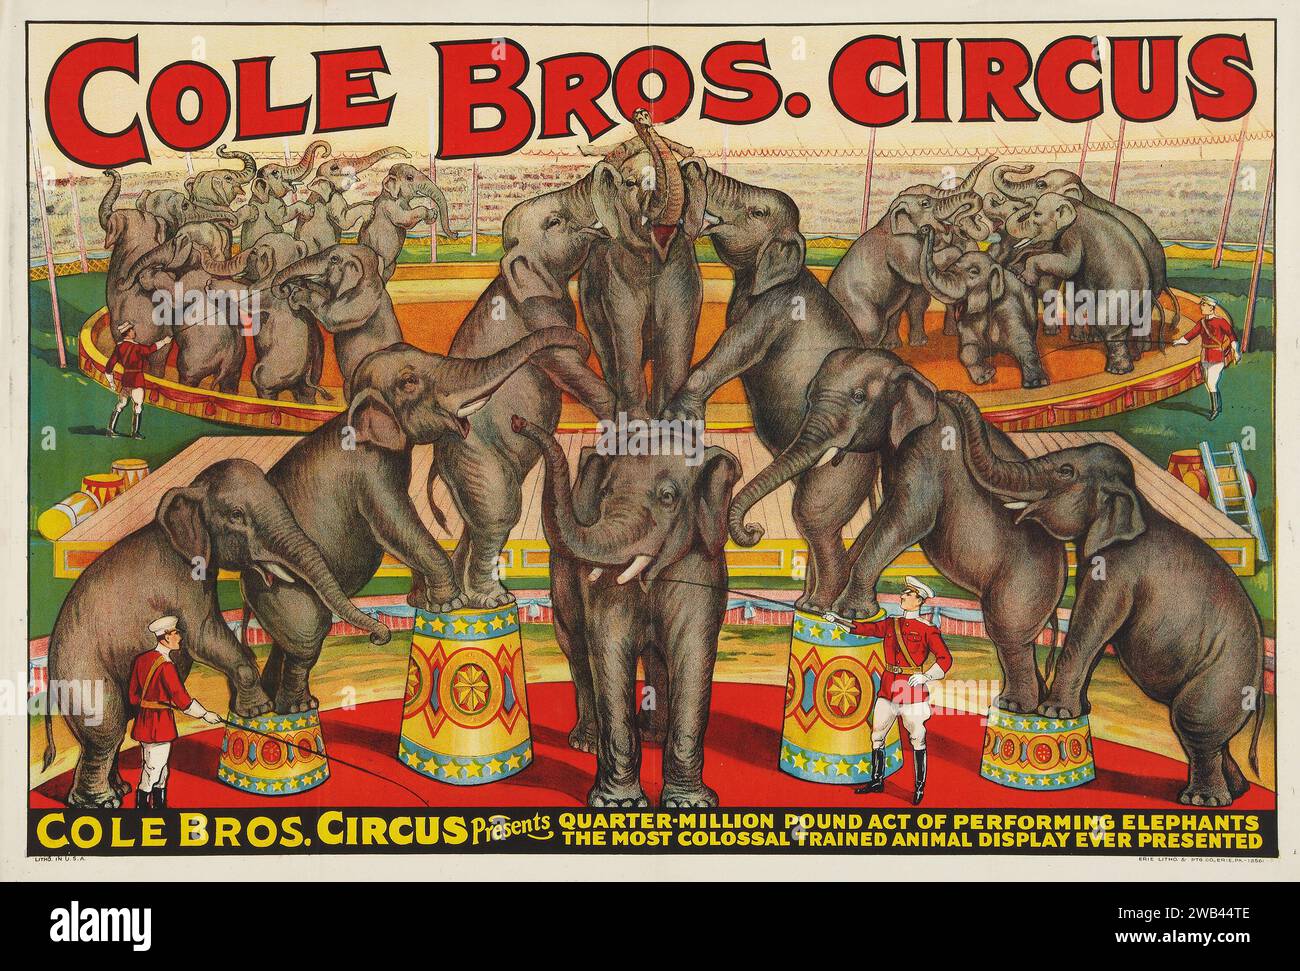 Circus Poster (Cole Brothers, 1930s) feat circus elephants Stock Photo